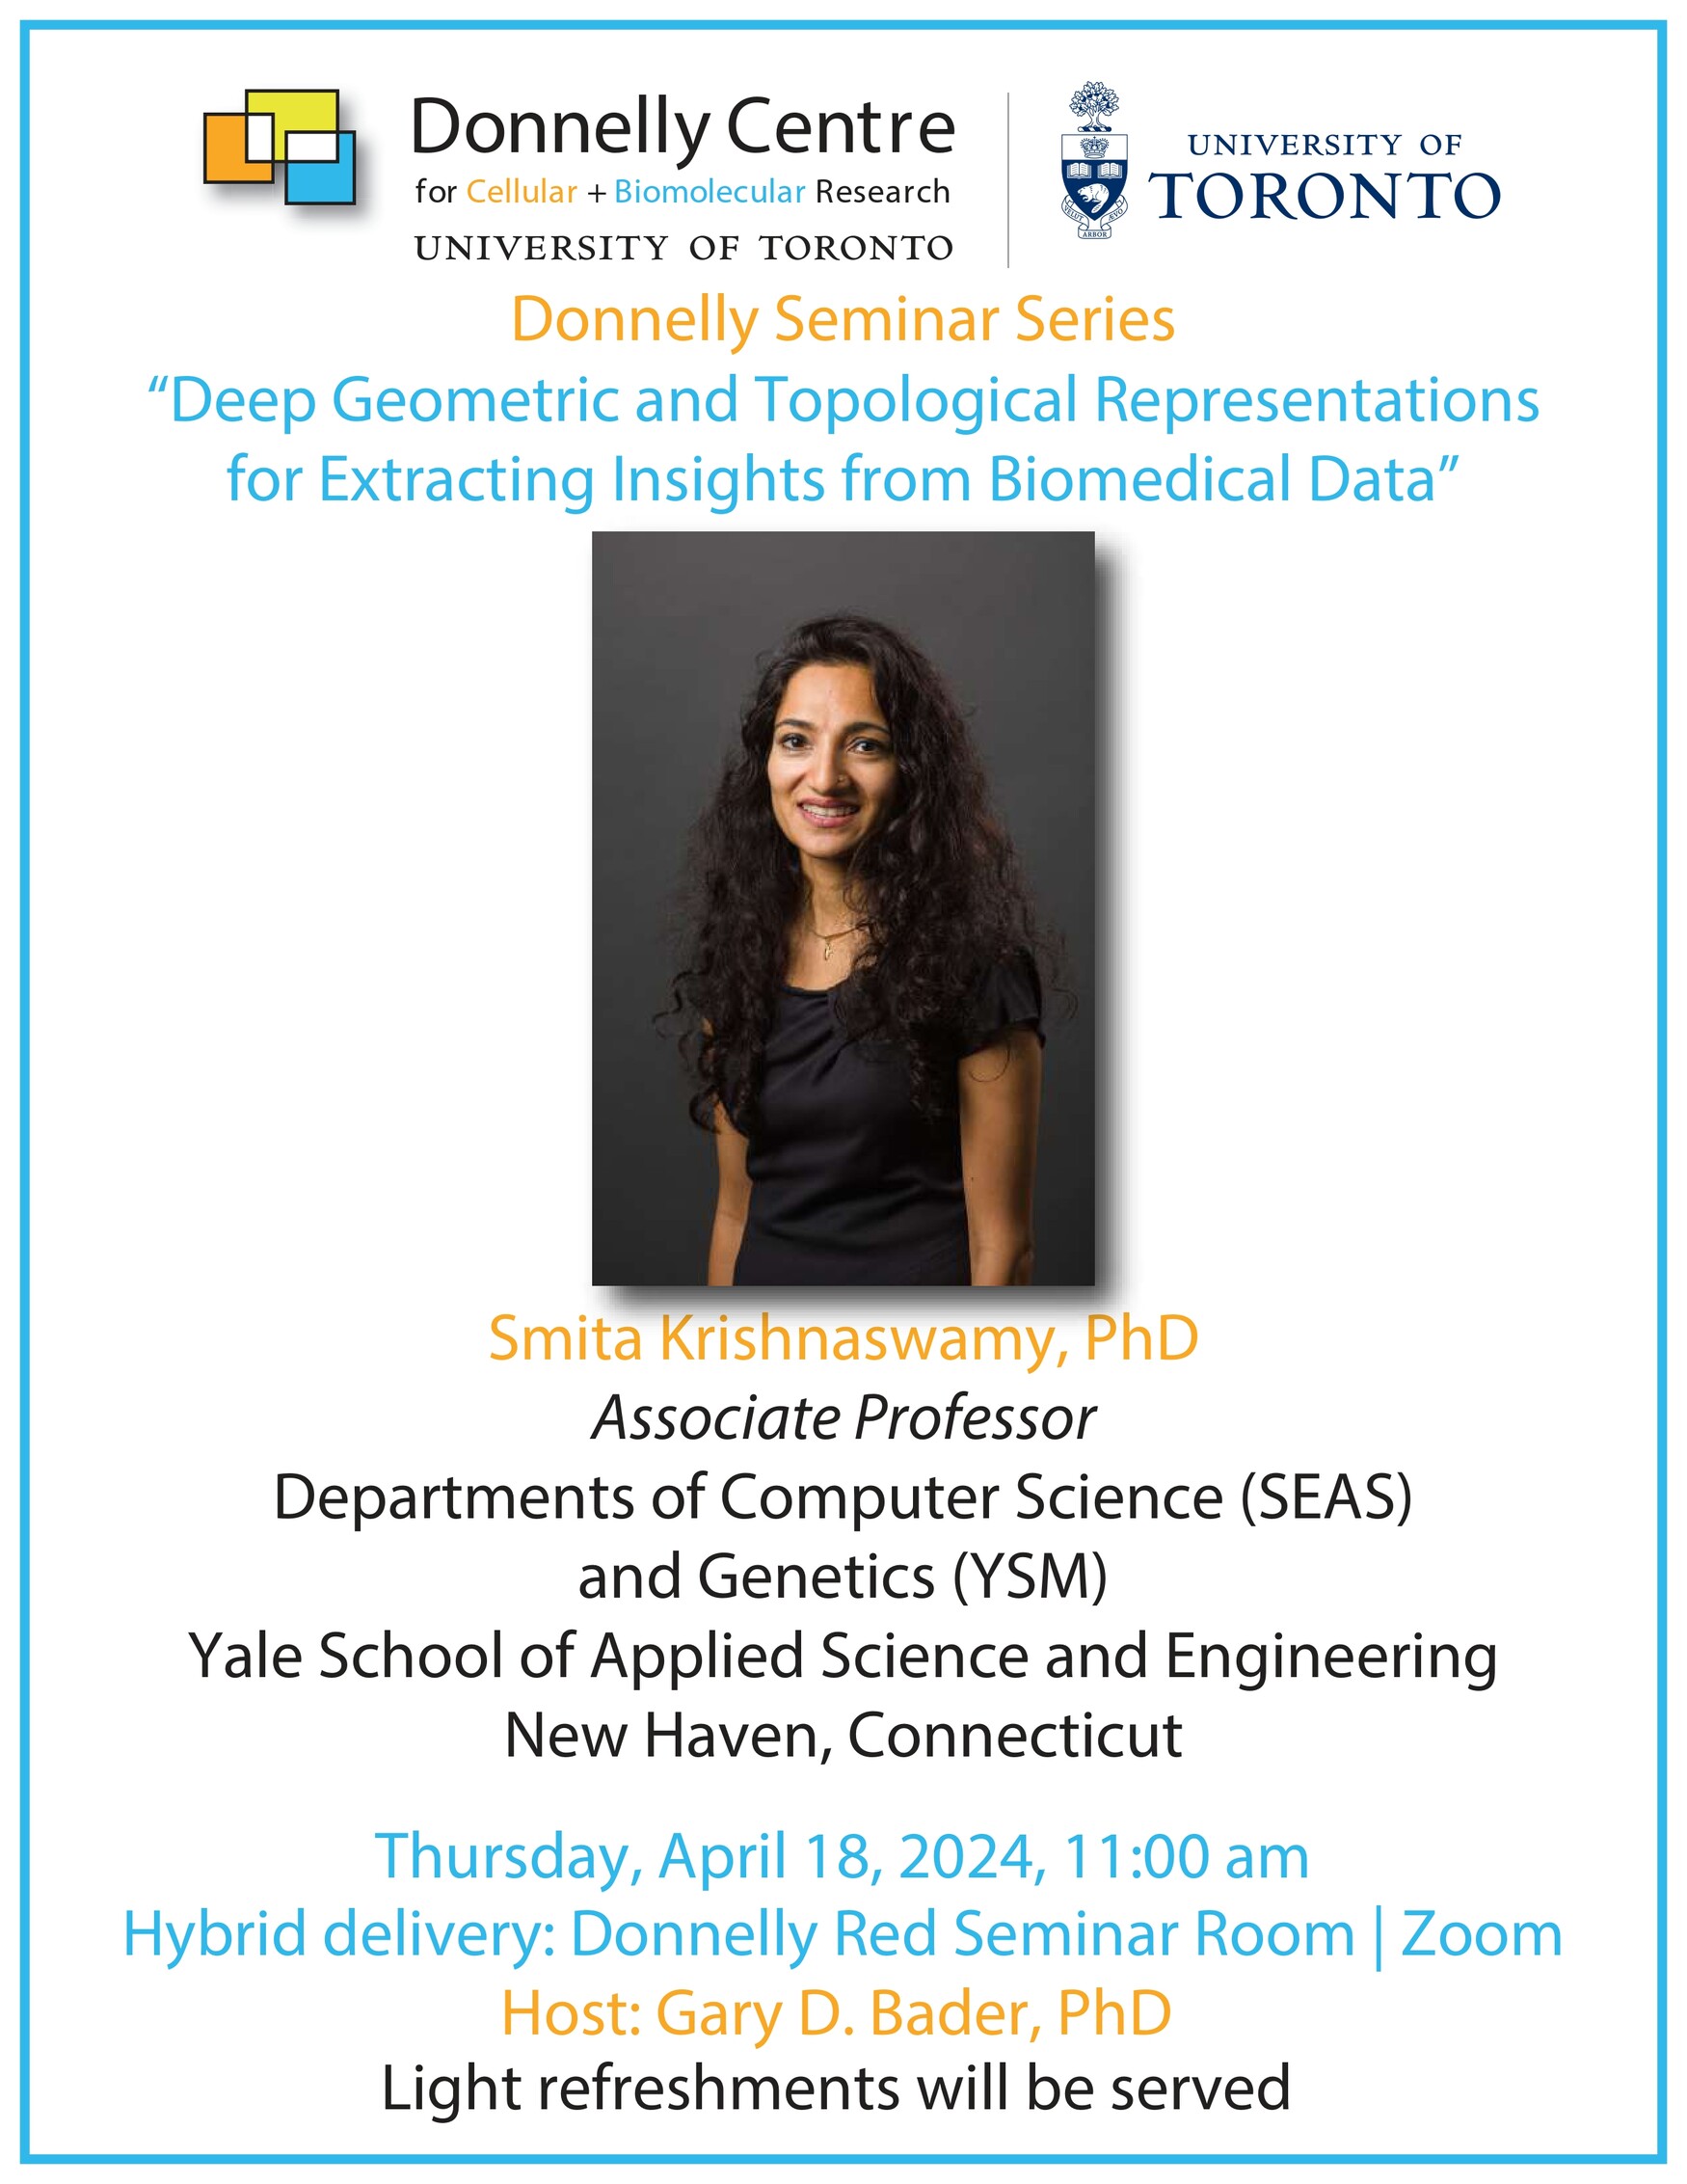 Poster for Donnelly Centre Seminar on "Extracting insights from biomedical data"